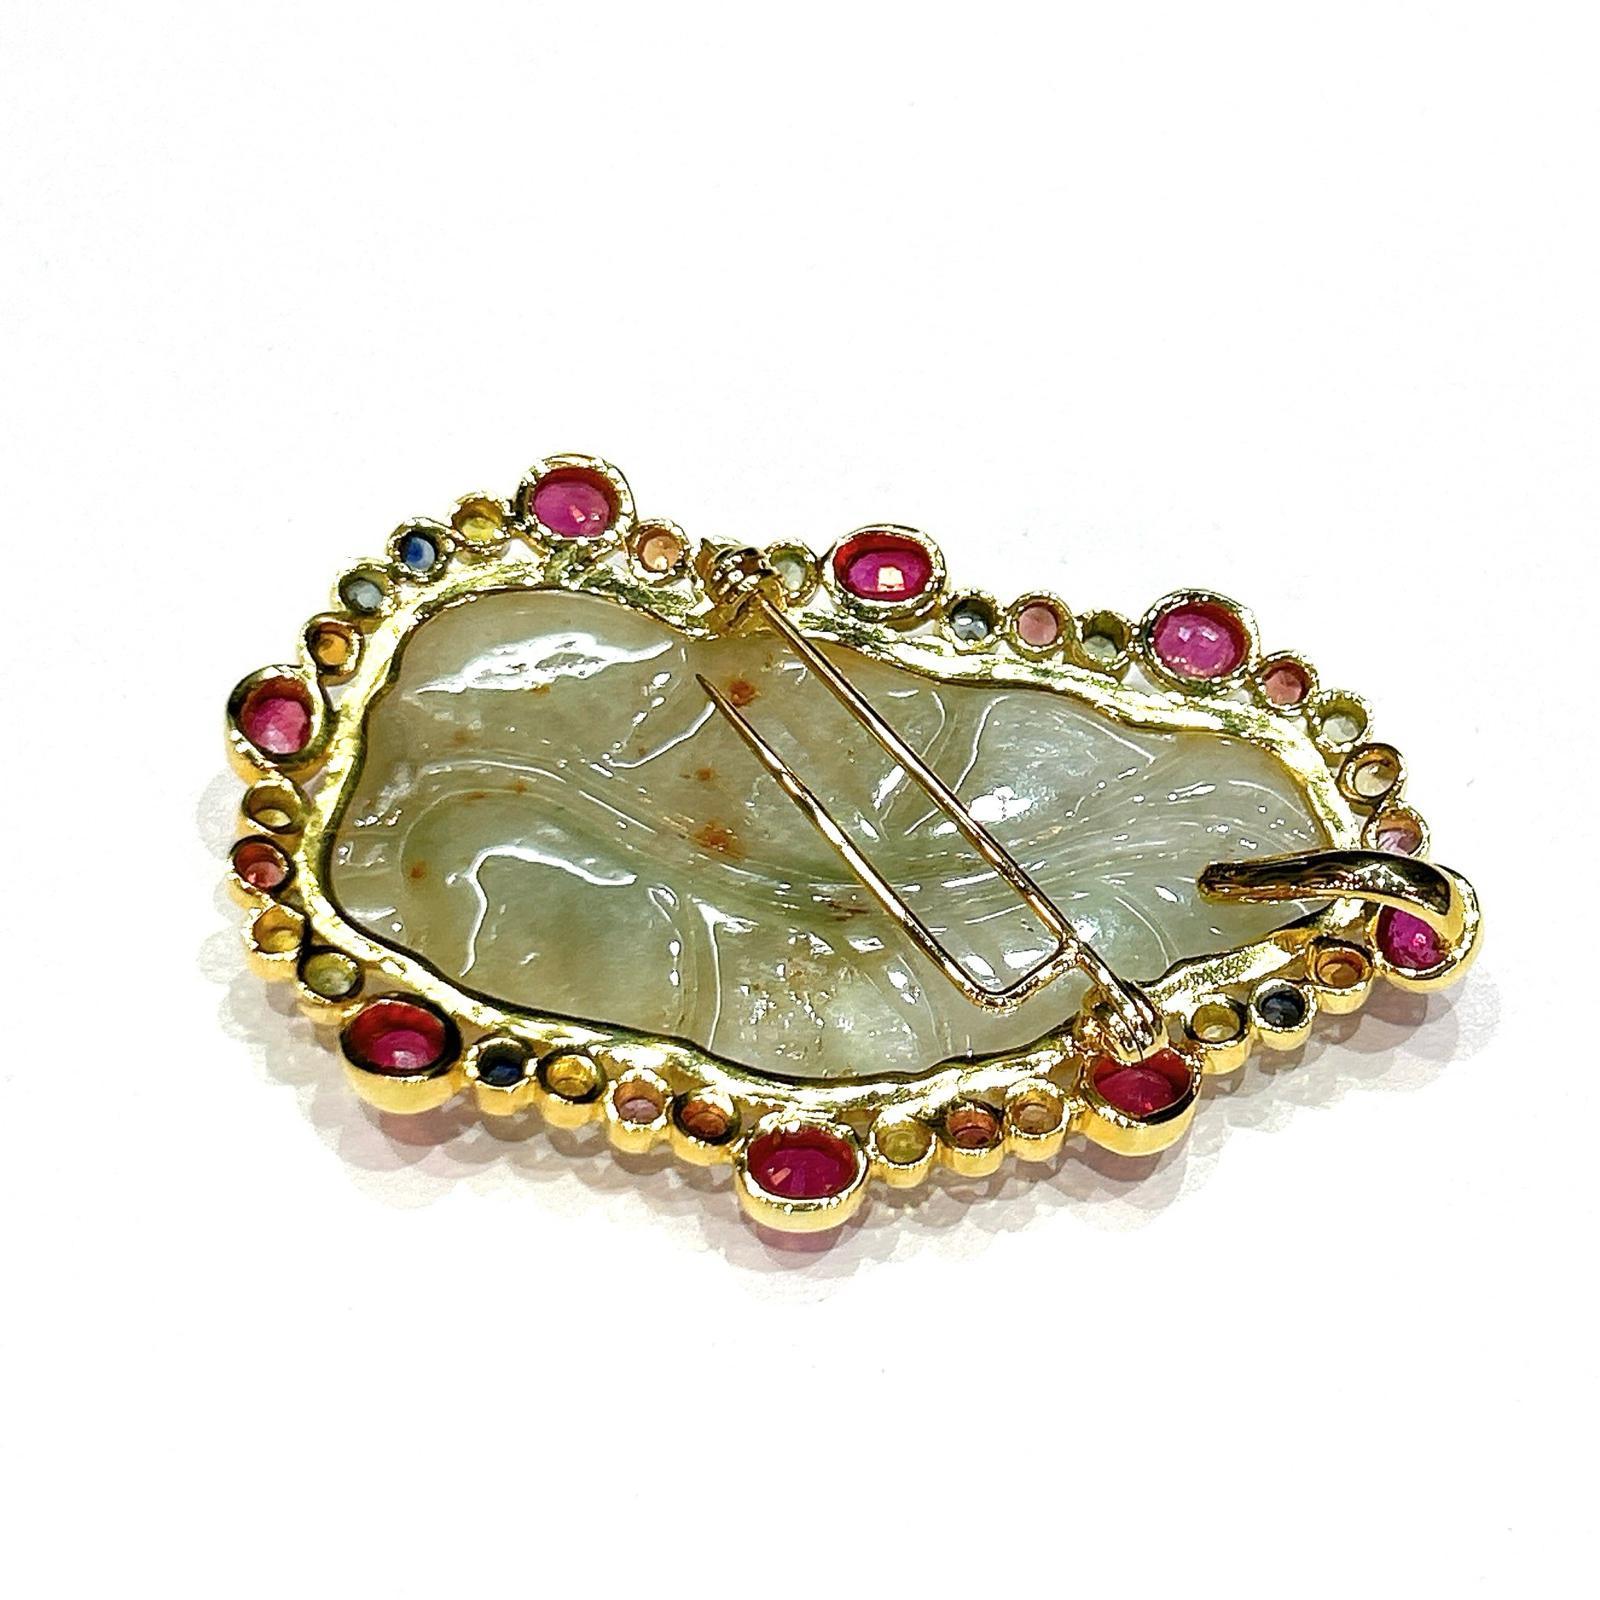 One of a kind Bochic “Orient” Vintage Jade Multi Gem & Ruby Brooch Set In 18K Gold & Silver 

Natural Red Ruby, Oval shape - 2 carat 
Multi color Natural Sapphires from Sri Lanka 
1 carat
Vintage Jade, honey, green colors 

The Brooch is from the